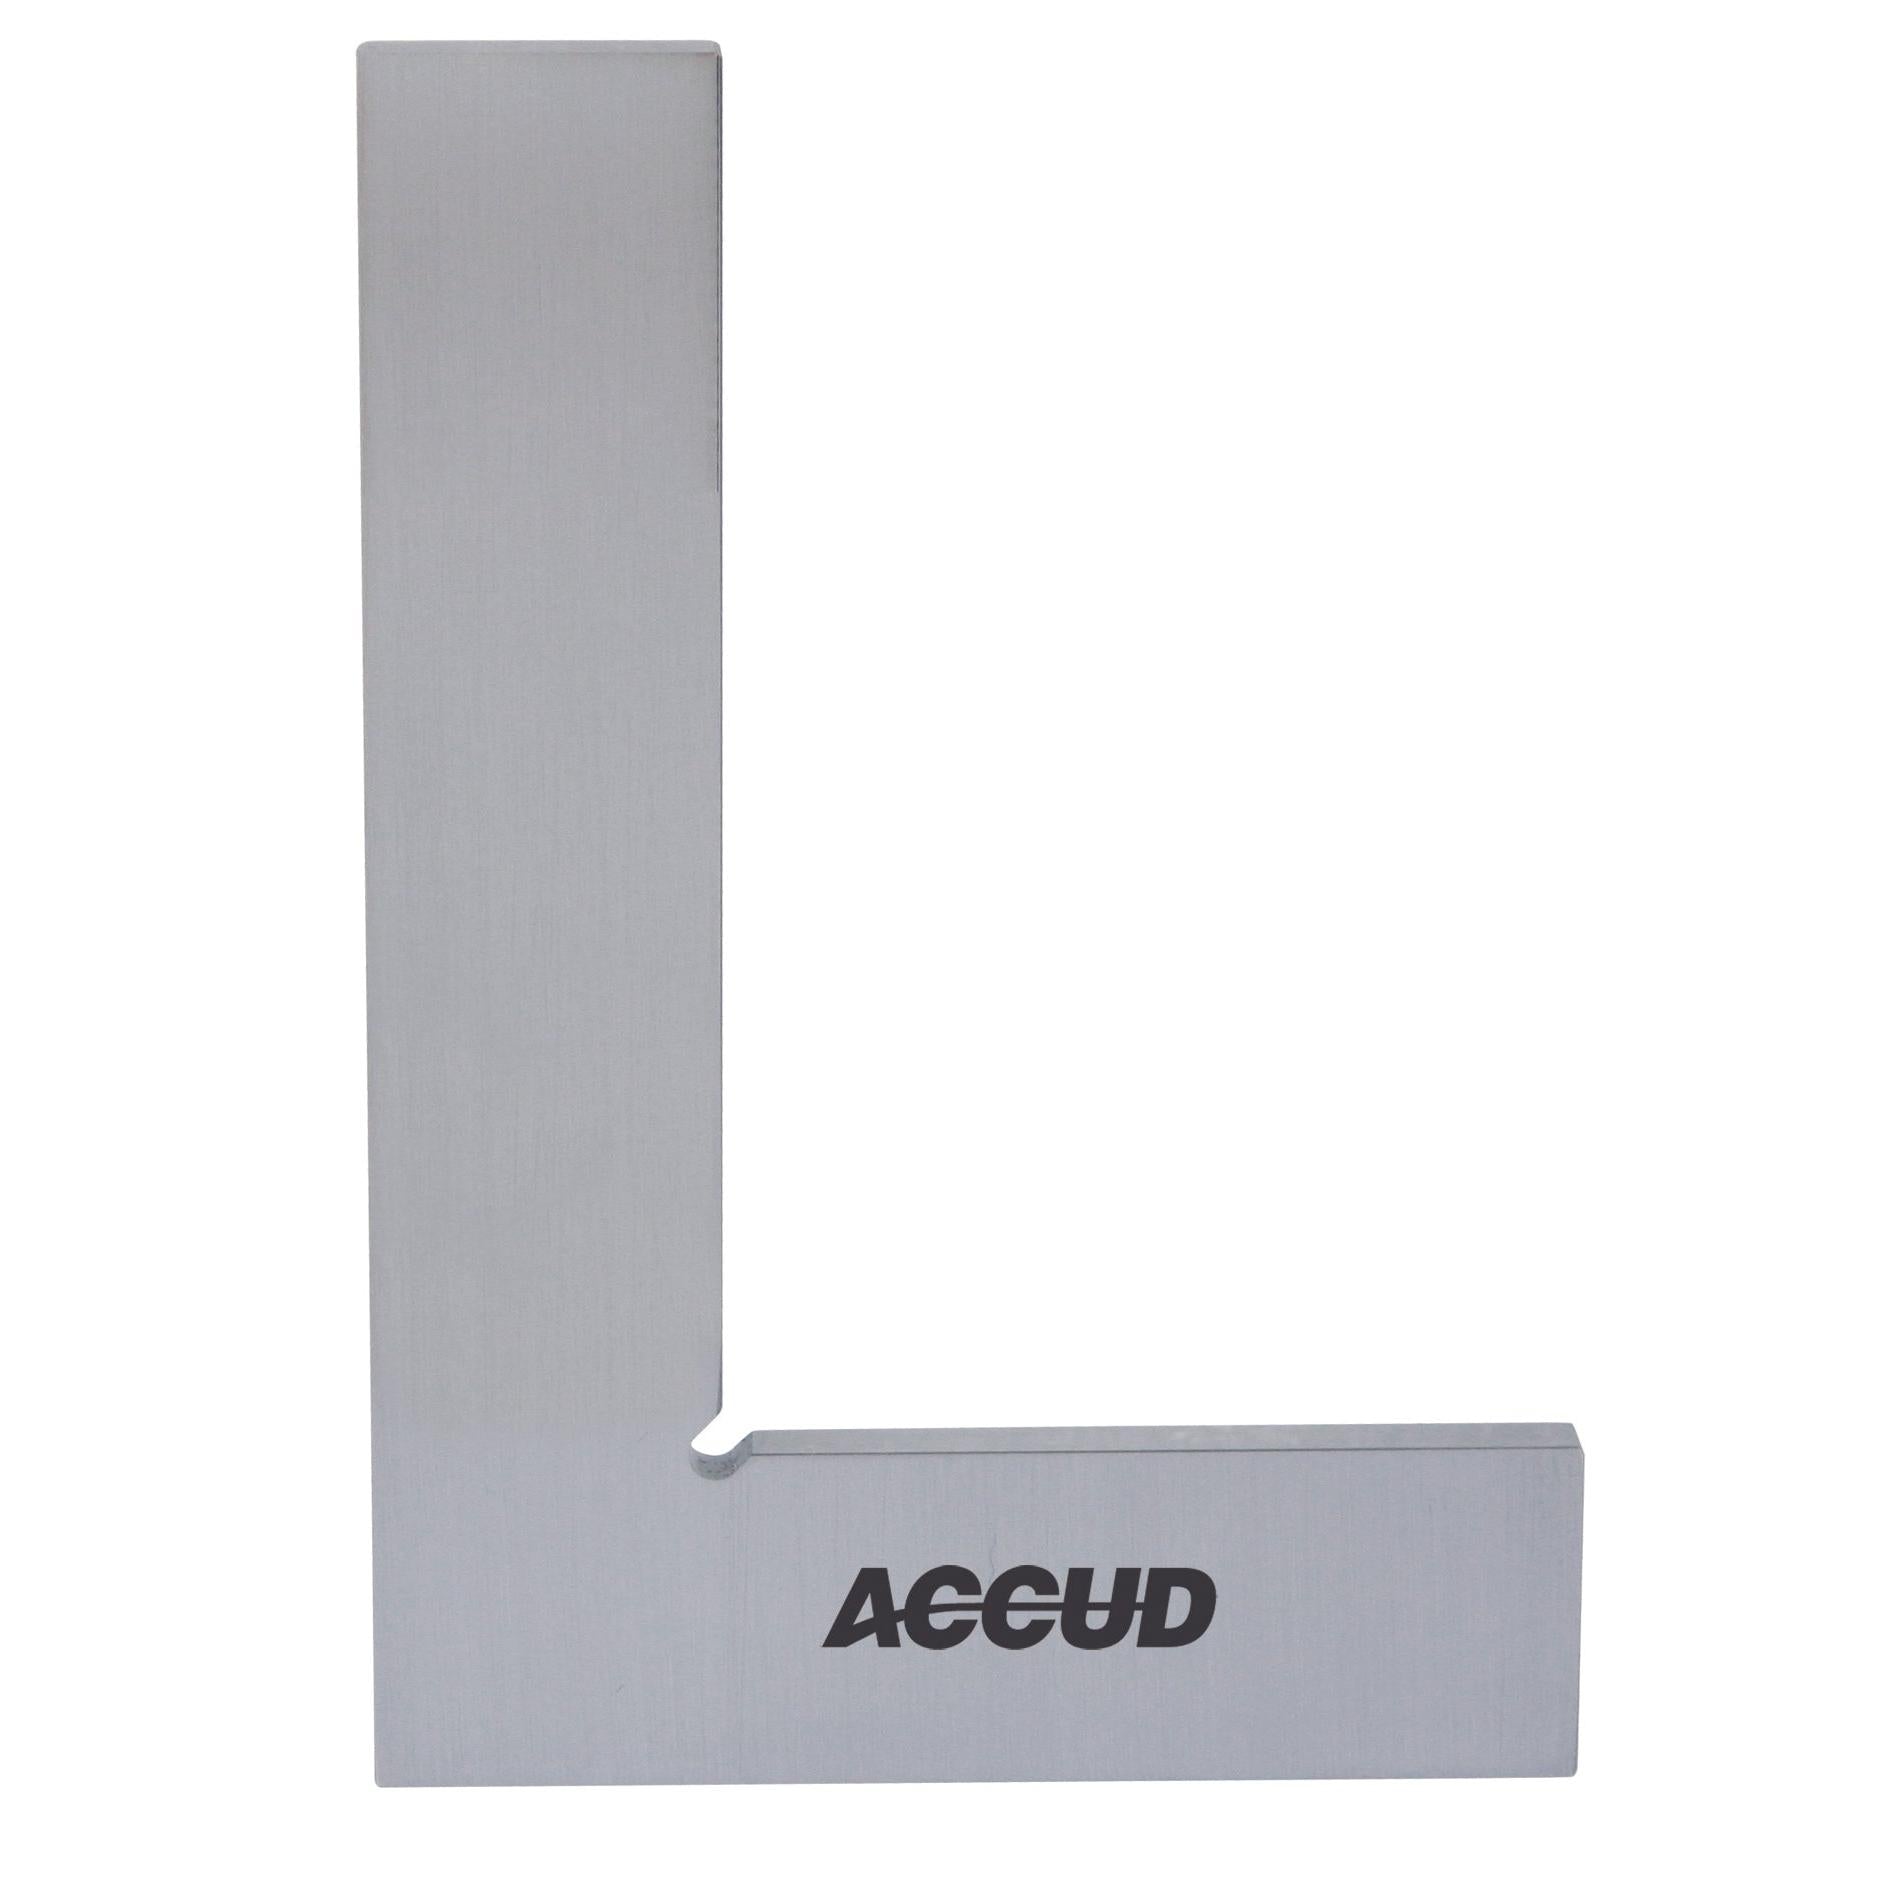 ACCUD | Flat Edge Square 100X70Mm | 841-004-10 Power Tool Services